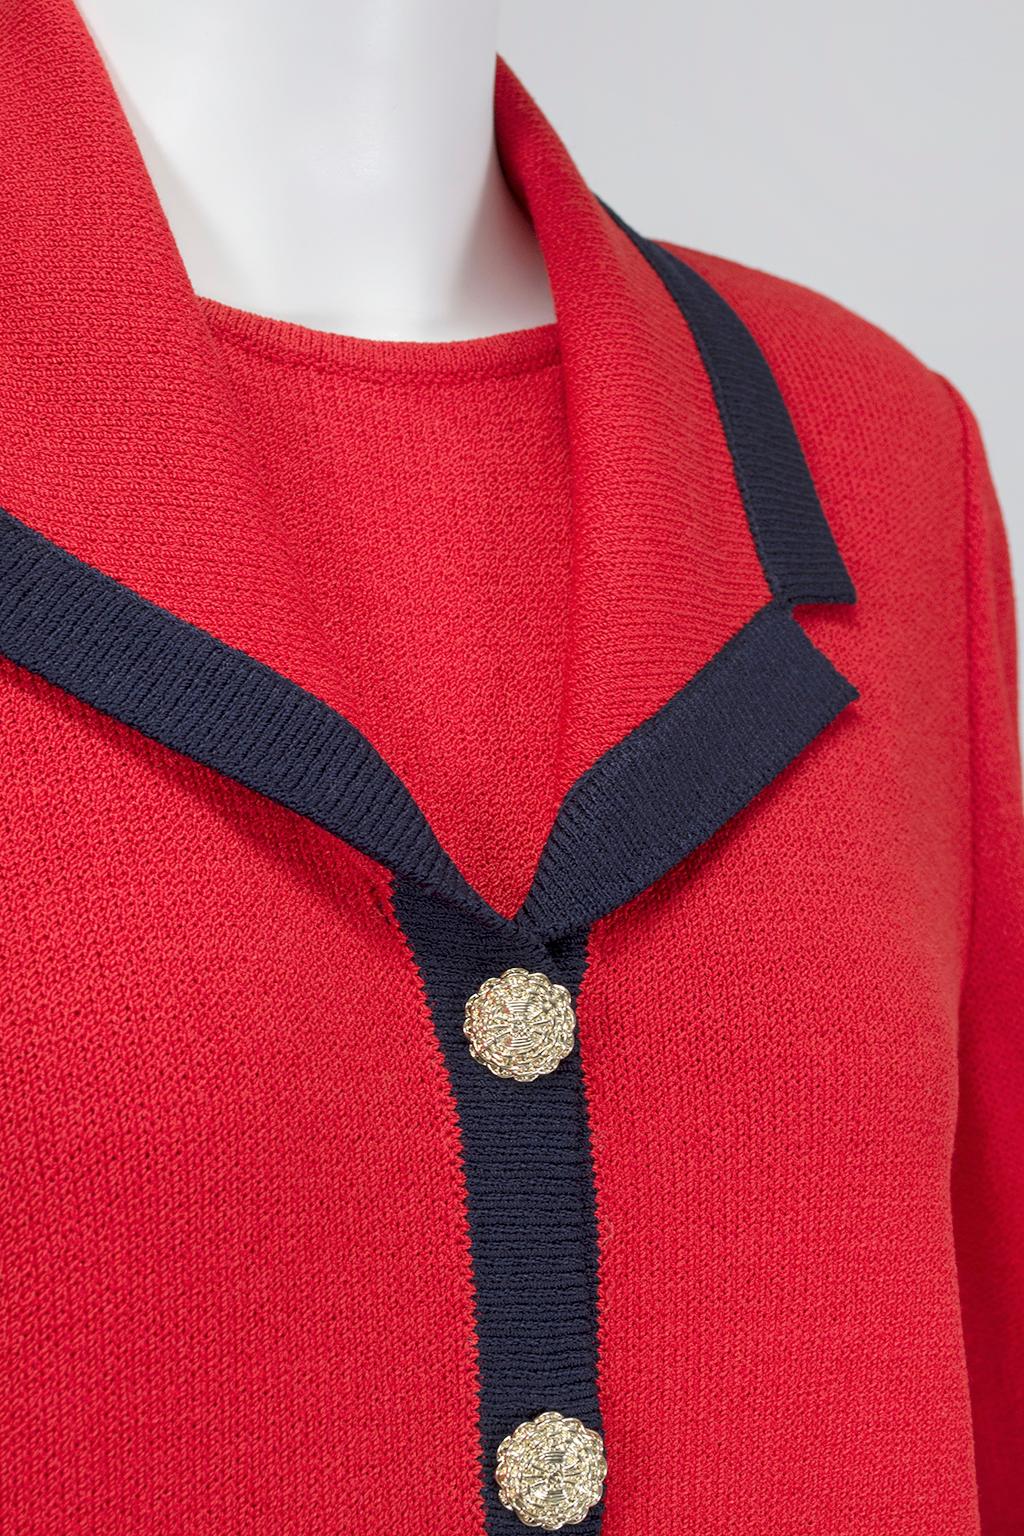 St John Collection Nautical Red Cardigan Dress Suit with Gold Accents – M, 1990s 1